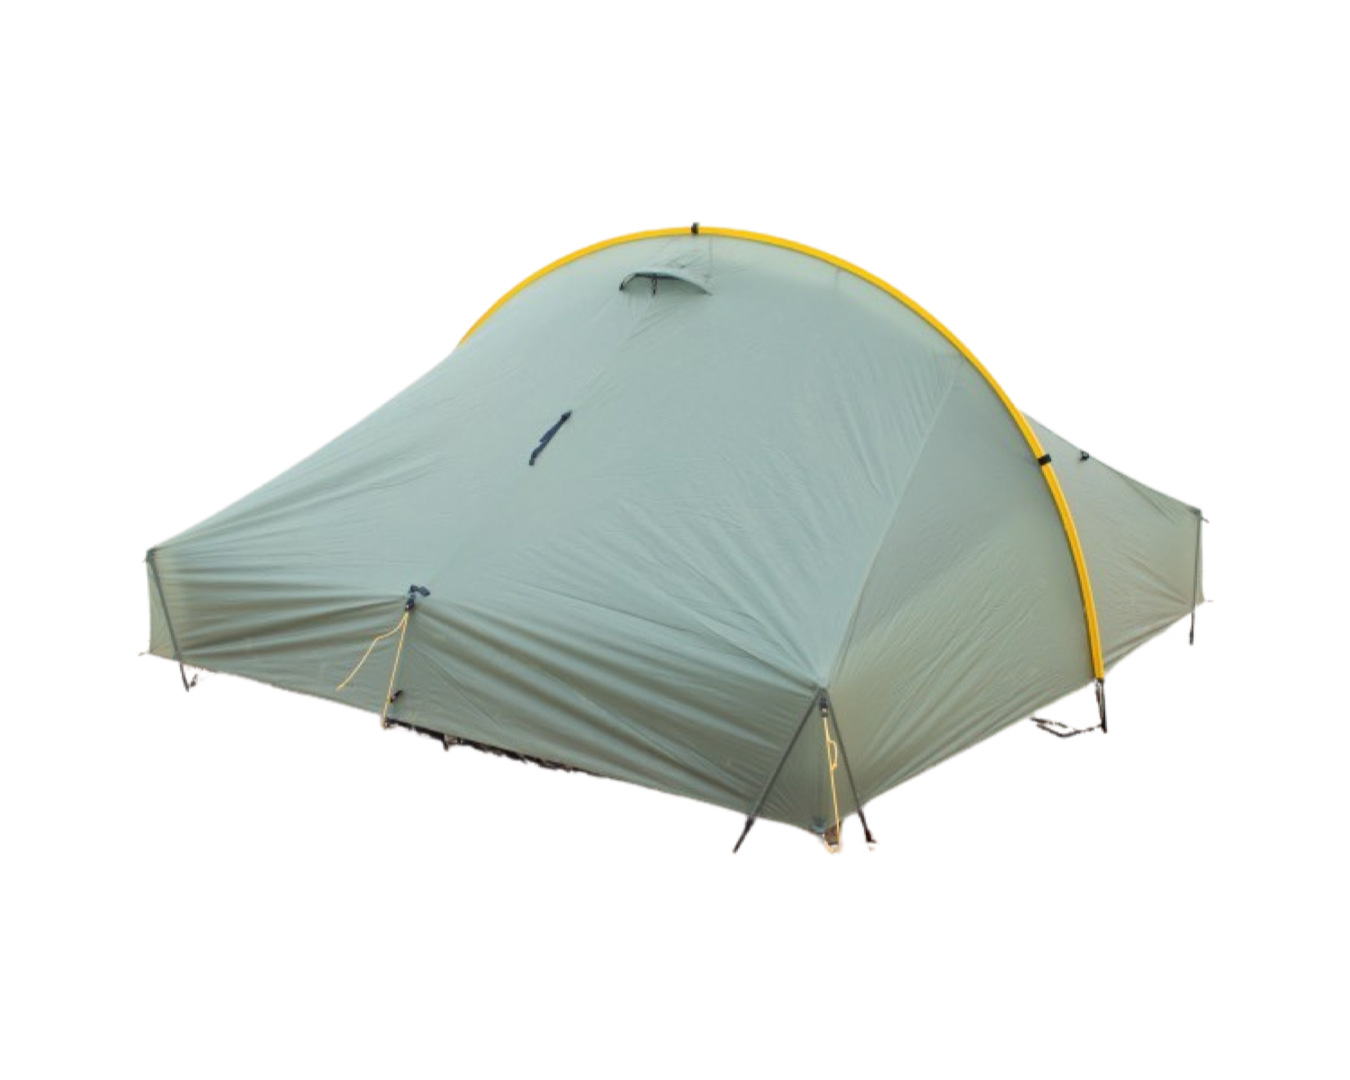 Tarptent Hogback 4 Person Backpacking Tent